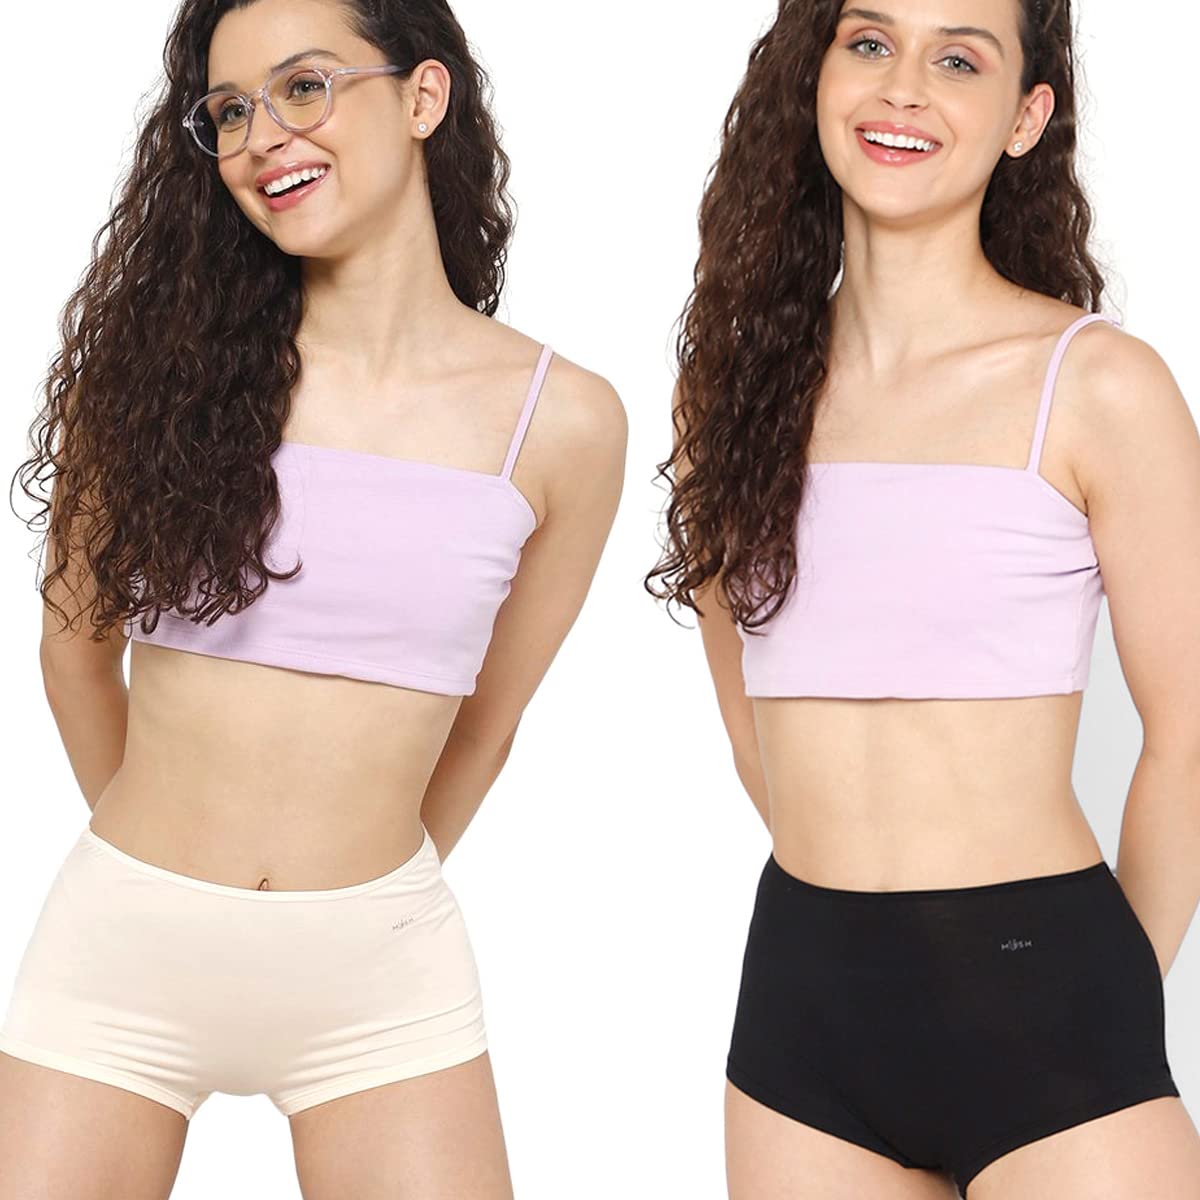 Mush Bamboo Boyshort Panties for Women | Ultra Soft Underwear | Breathable, Anti-Odor, All Day Comfort Pack of 2